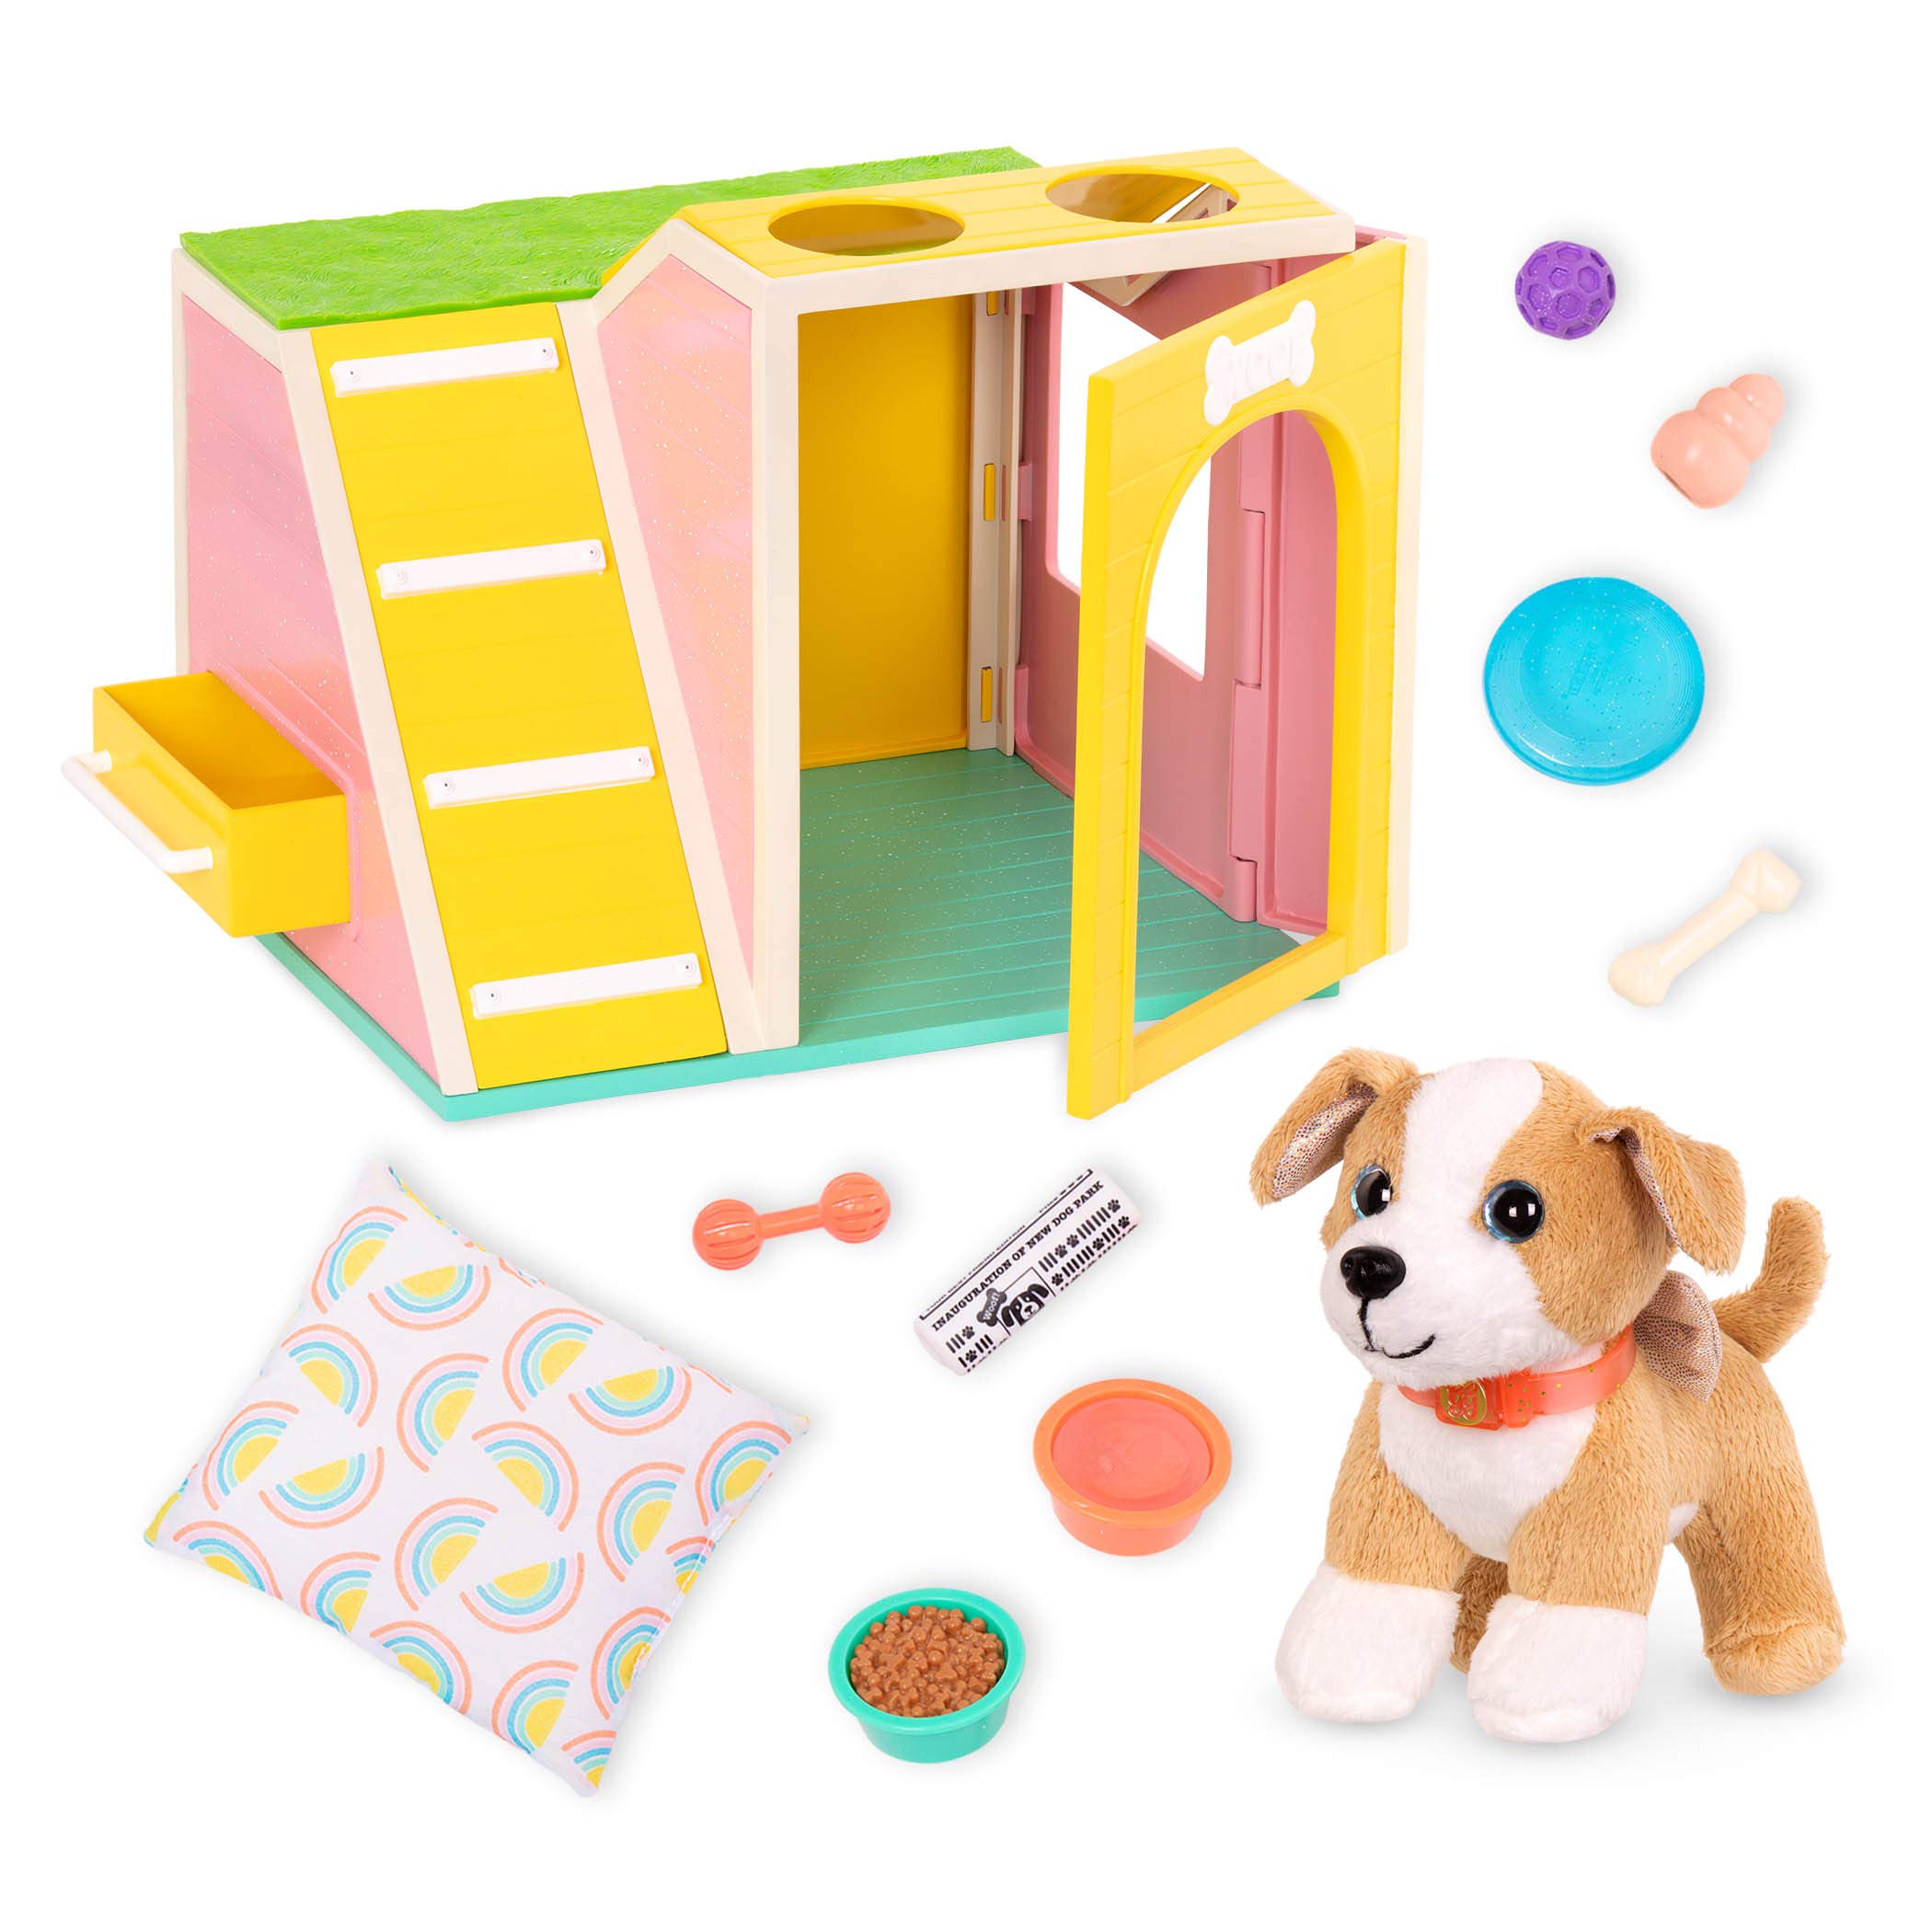 Glitter Girls – Dog House Playset-plush Puppy Chihuahua – 14-inch Doll Accessories for Kids Ages 3 and Up – Children’s Toys